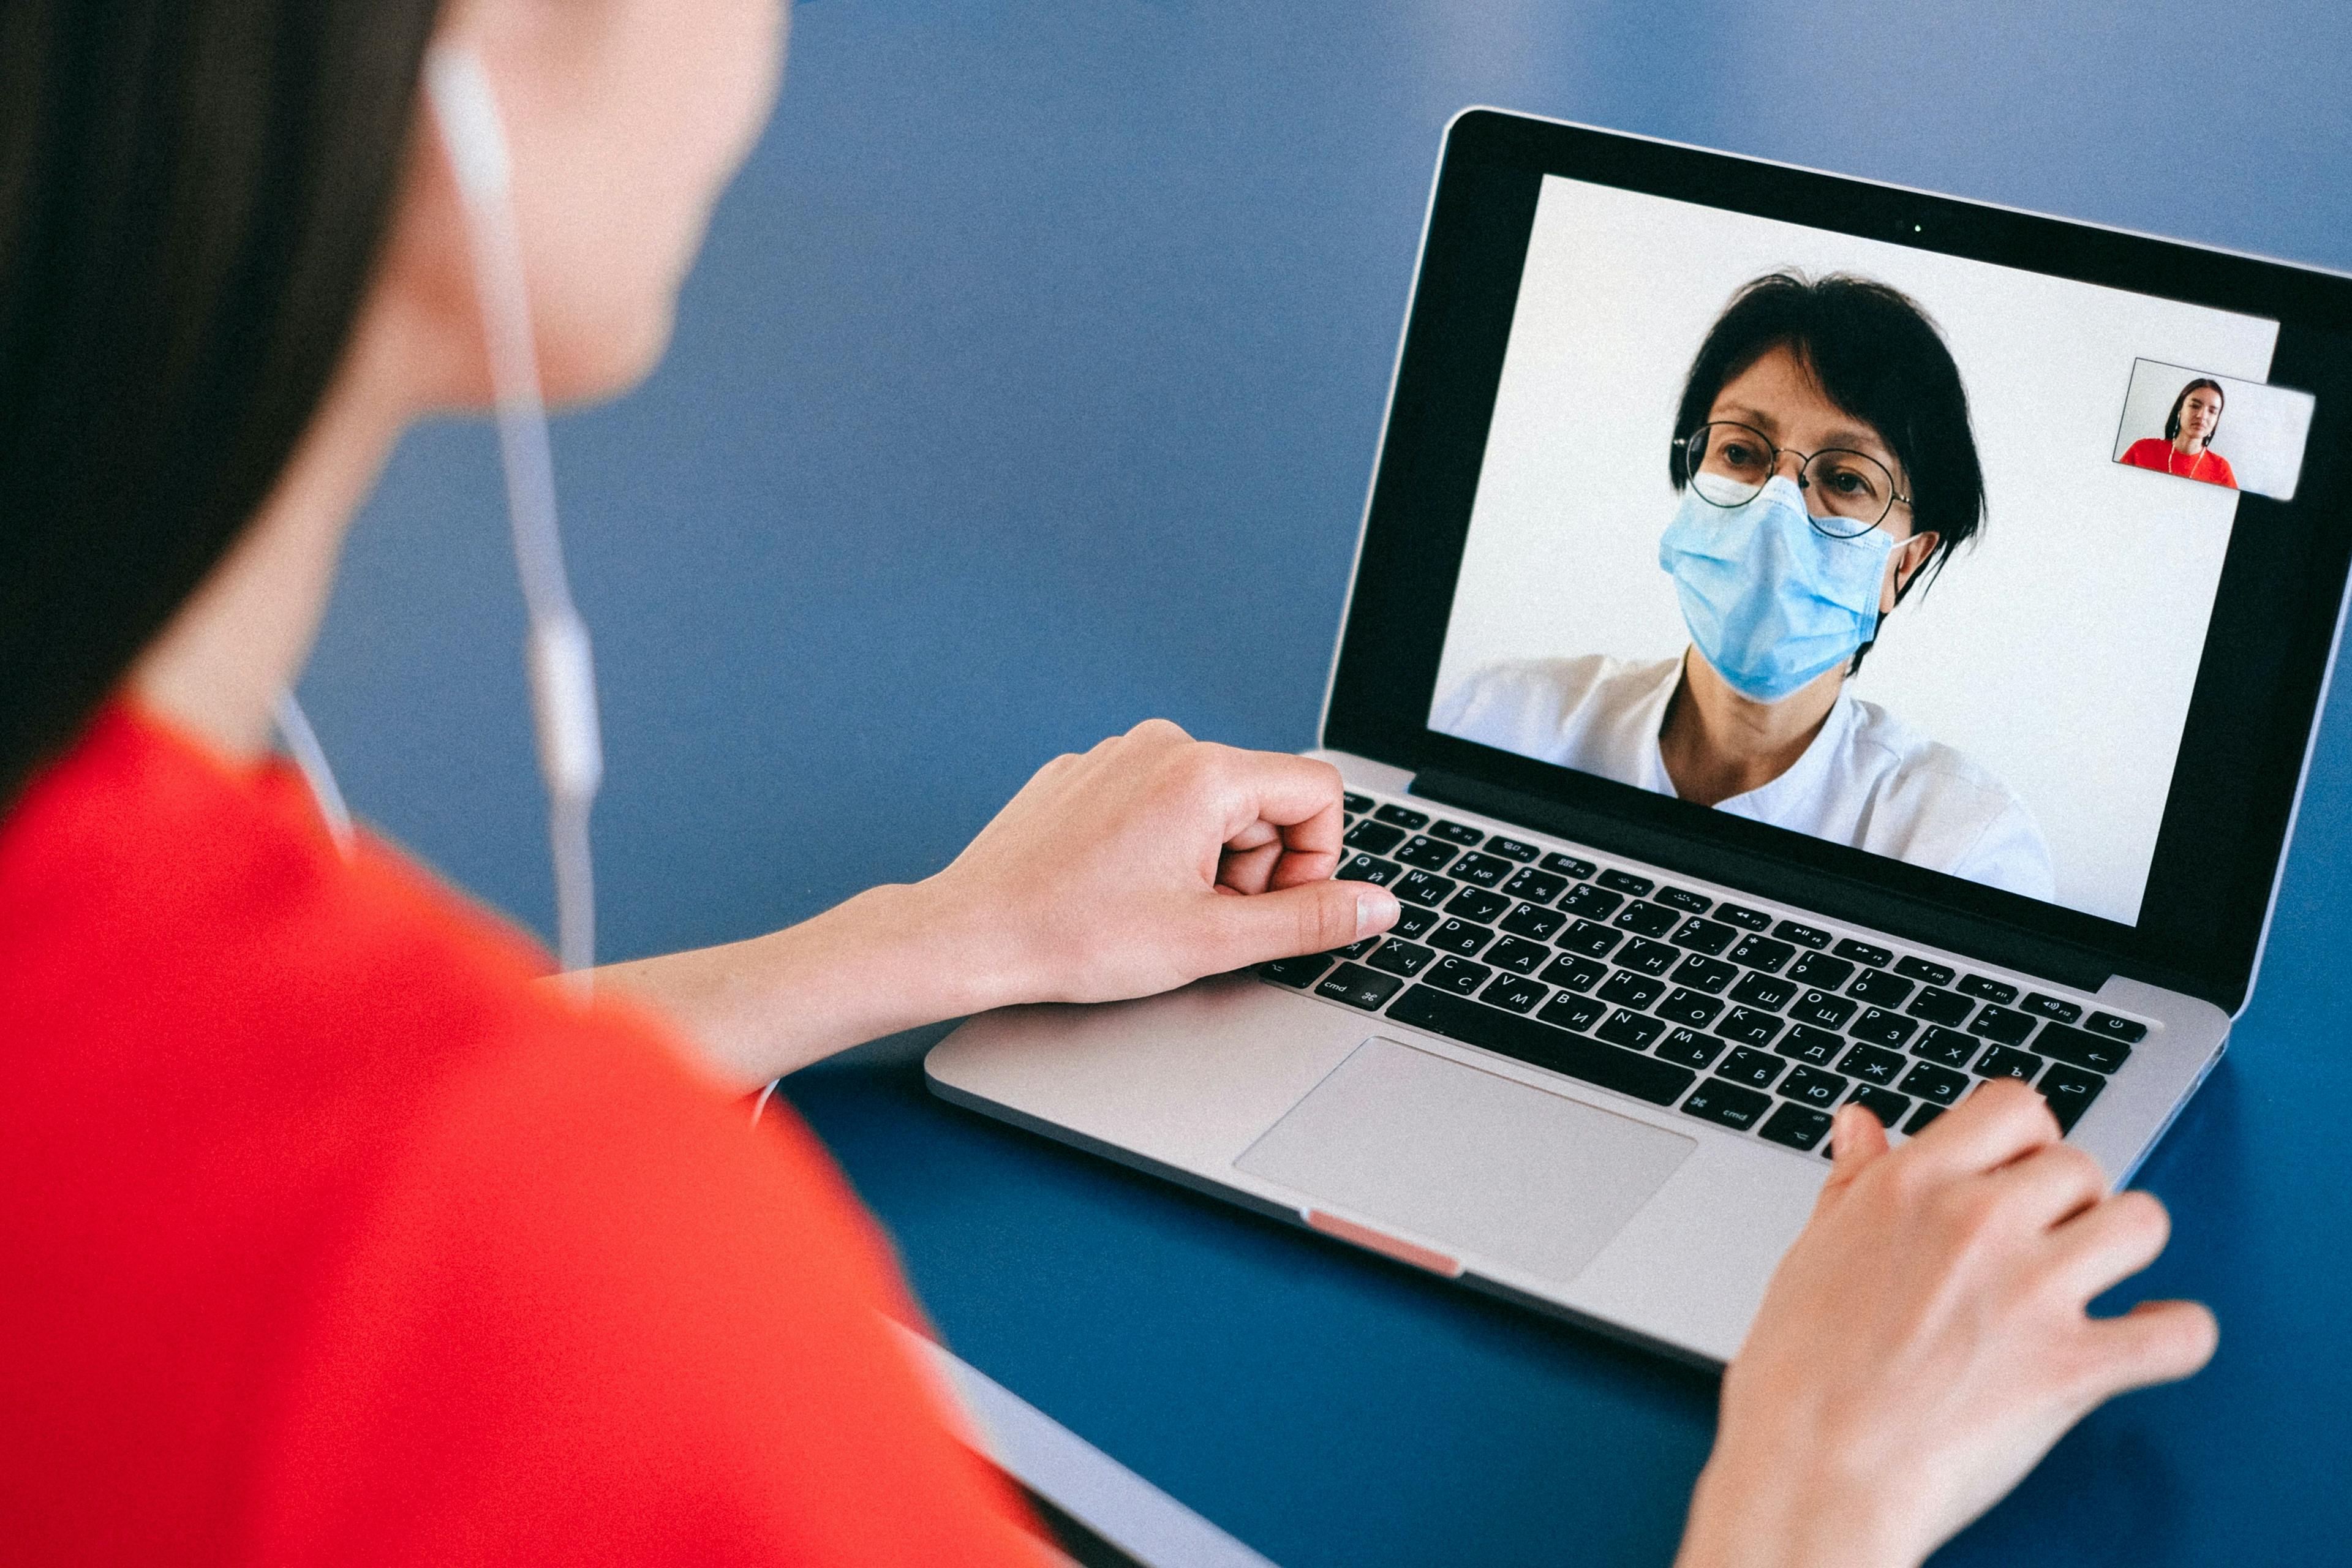 Expert insight on telehealth strategies and trends